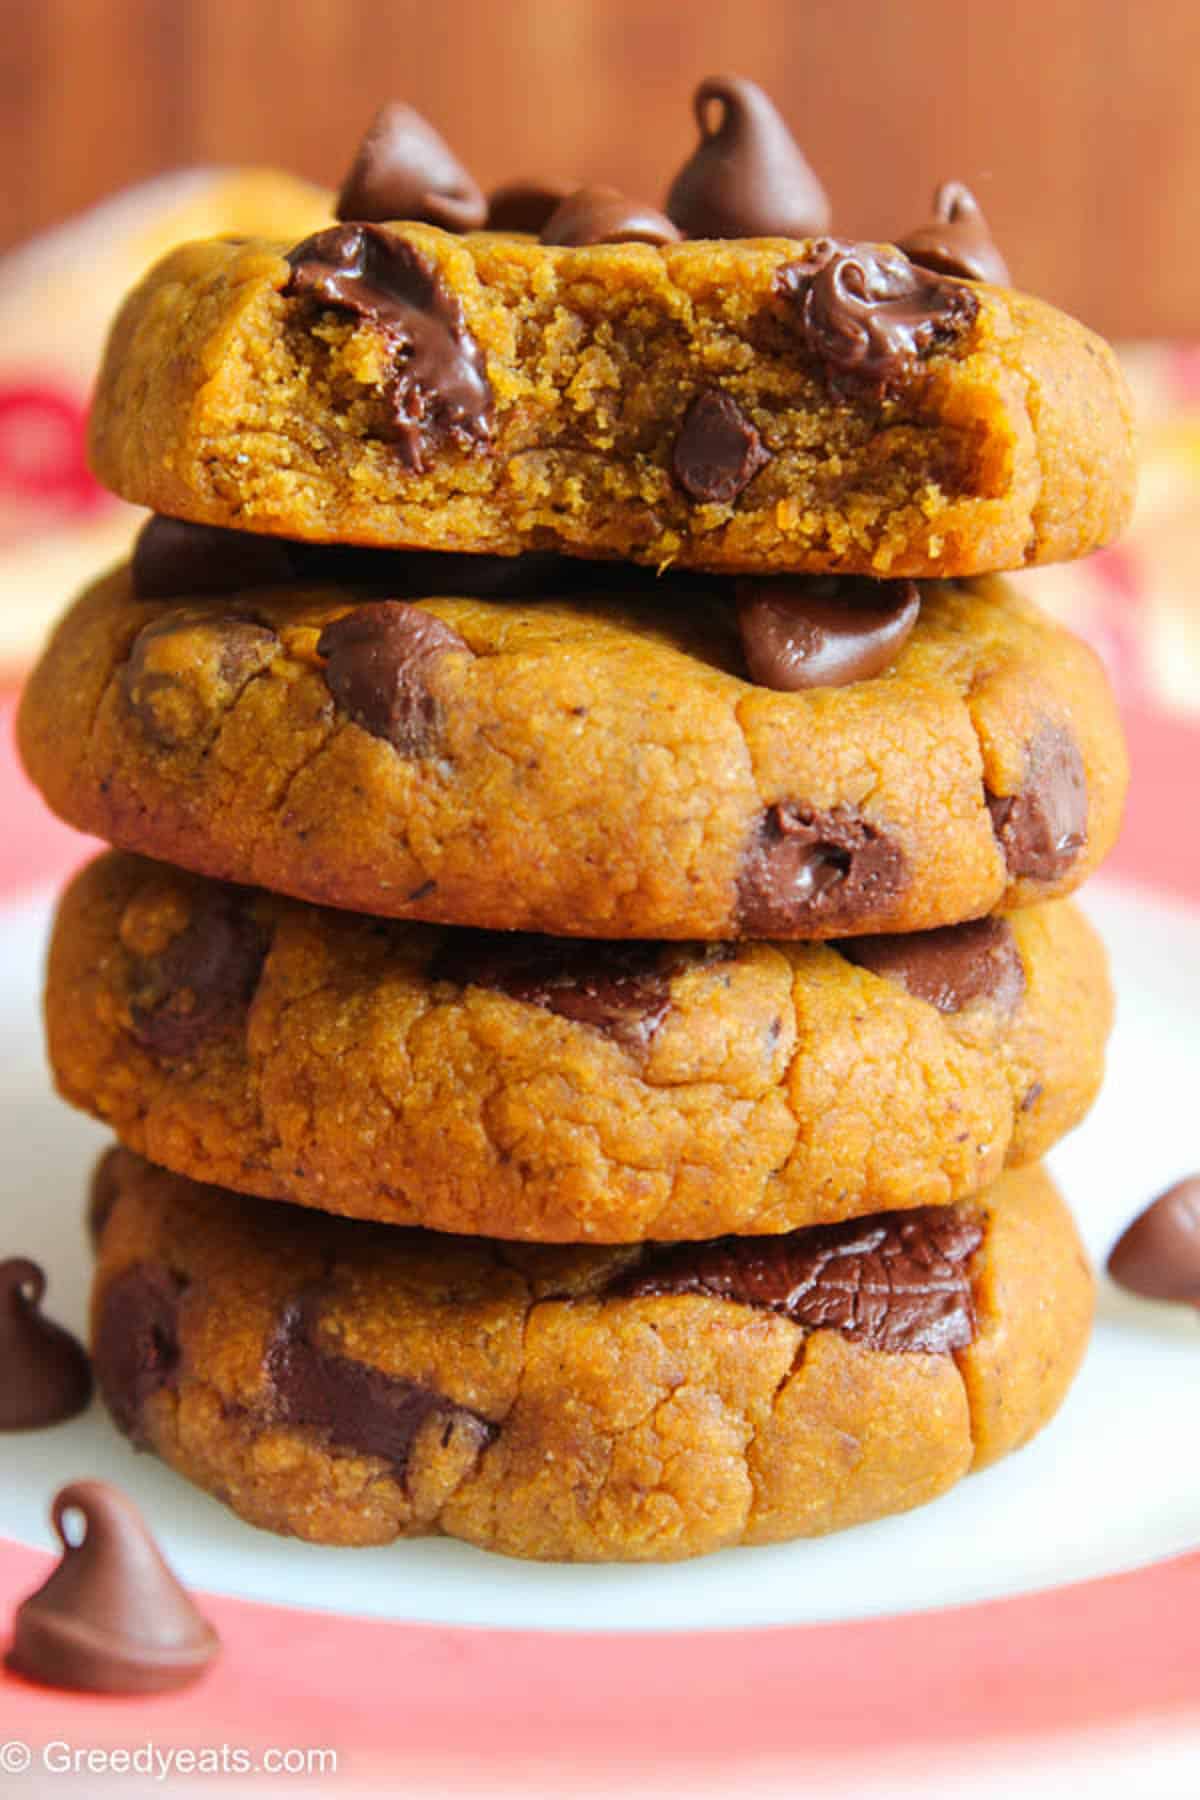 Thick, chewy and soft pumpkin chocolate chip cookies scented with warm spices.